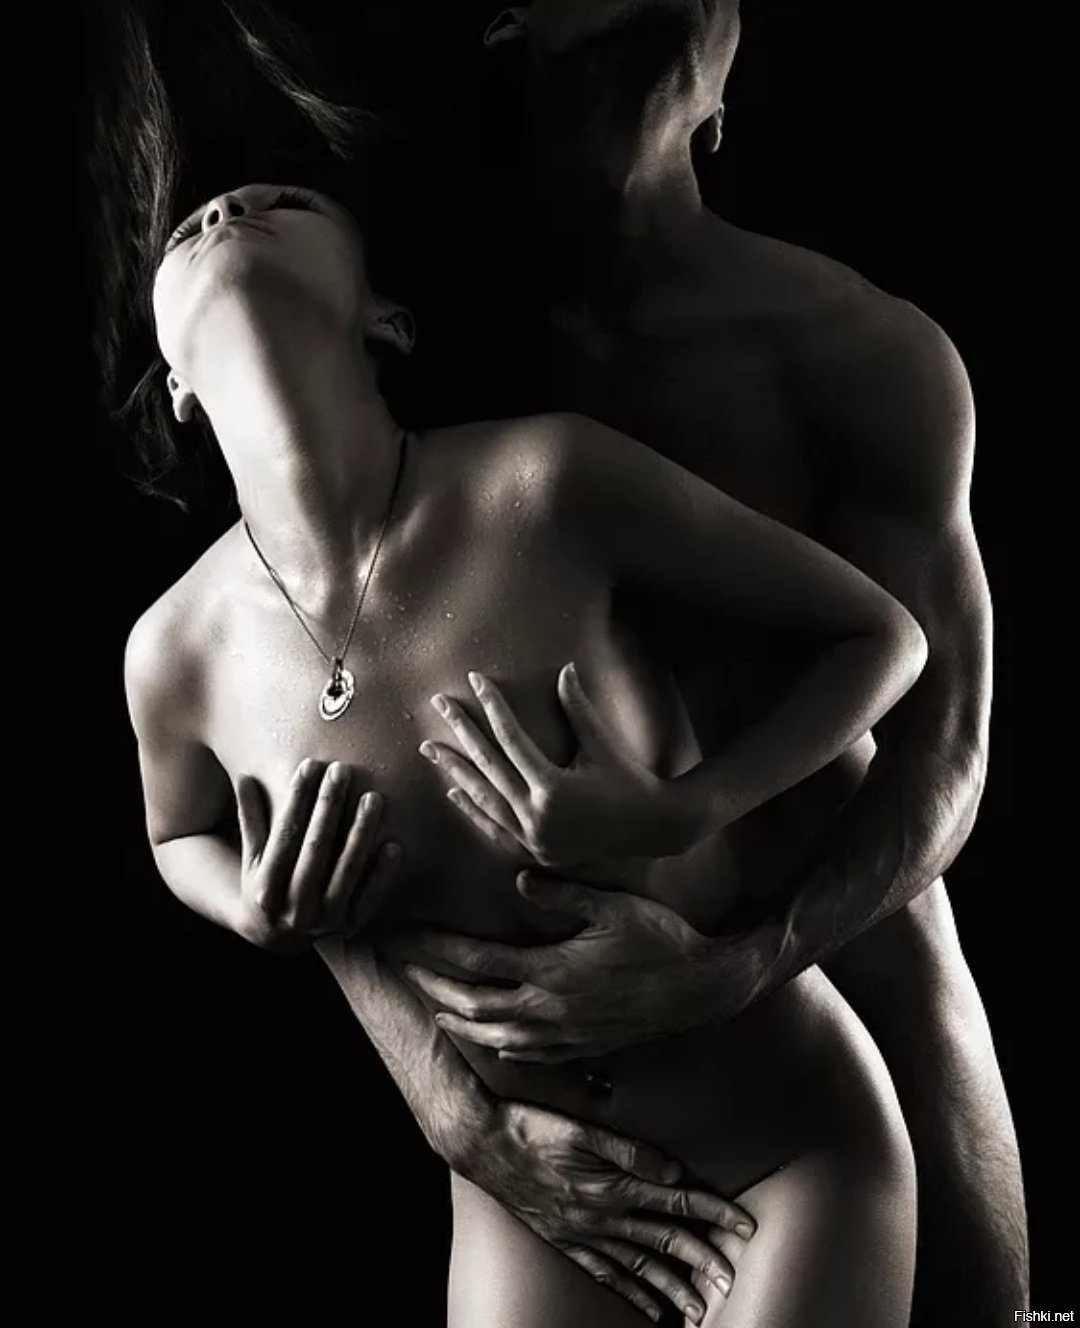 Erotic Surrender The Sensual Joys Of Female Submission